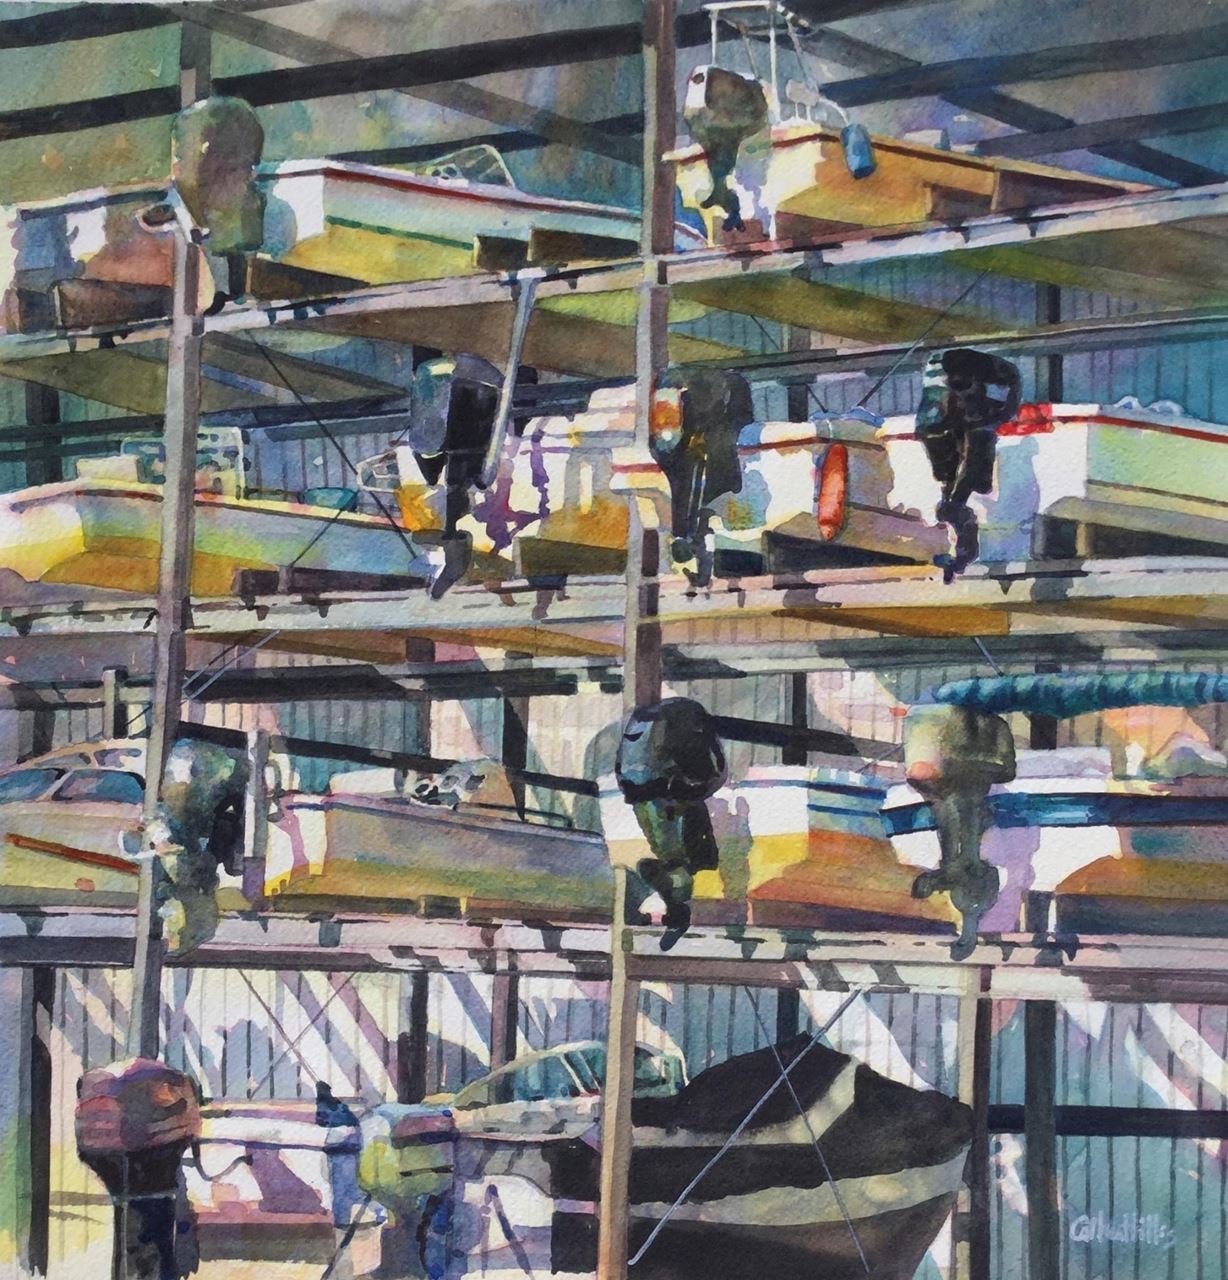 Watermedia painting by Hillis, image of boats in dry dock arranged in a geometric way